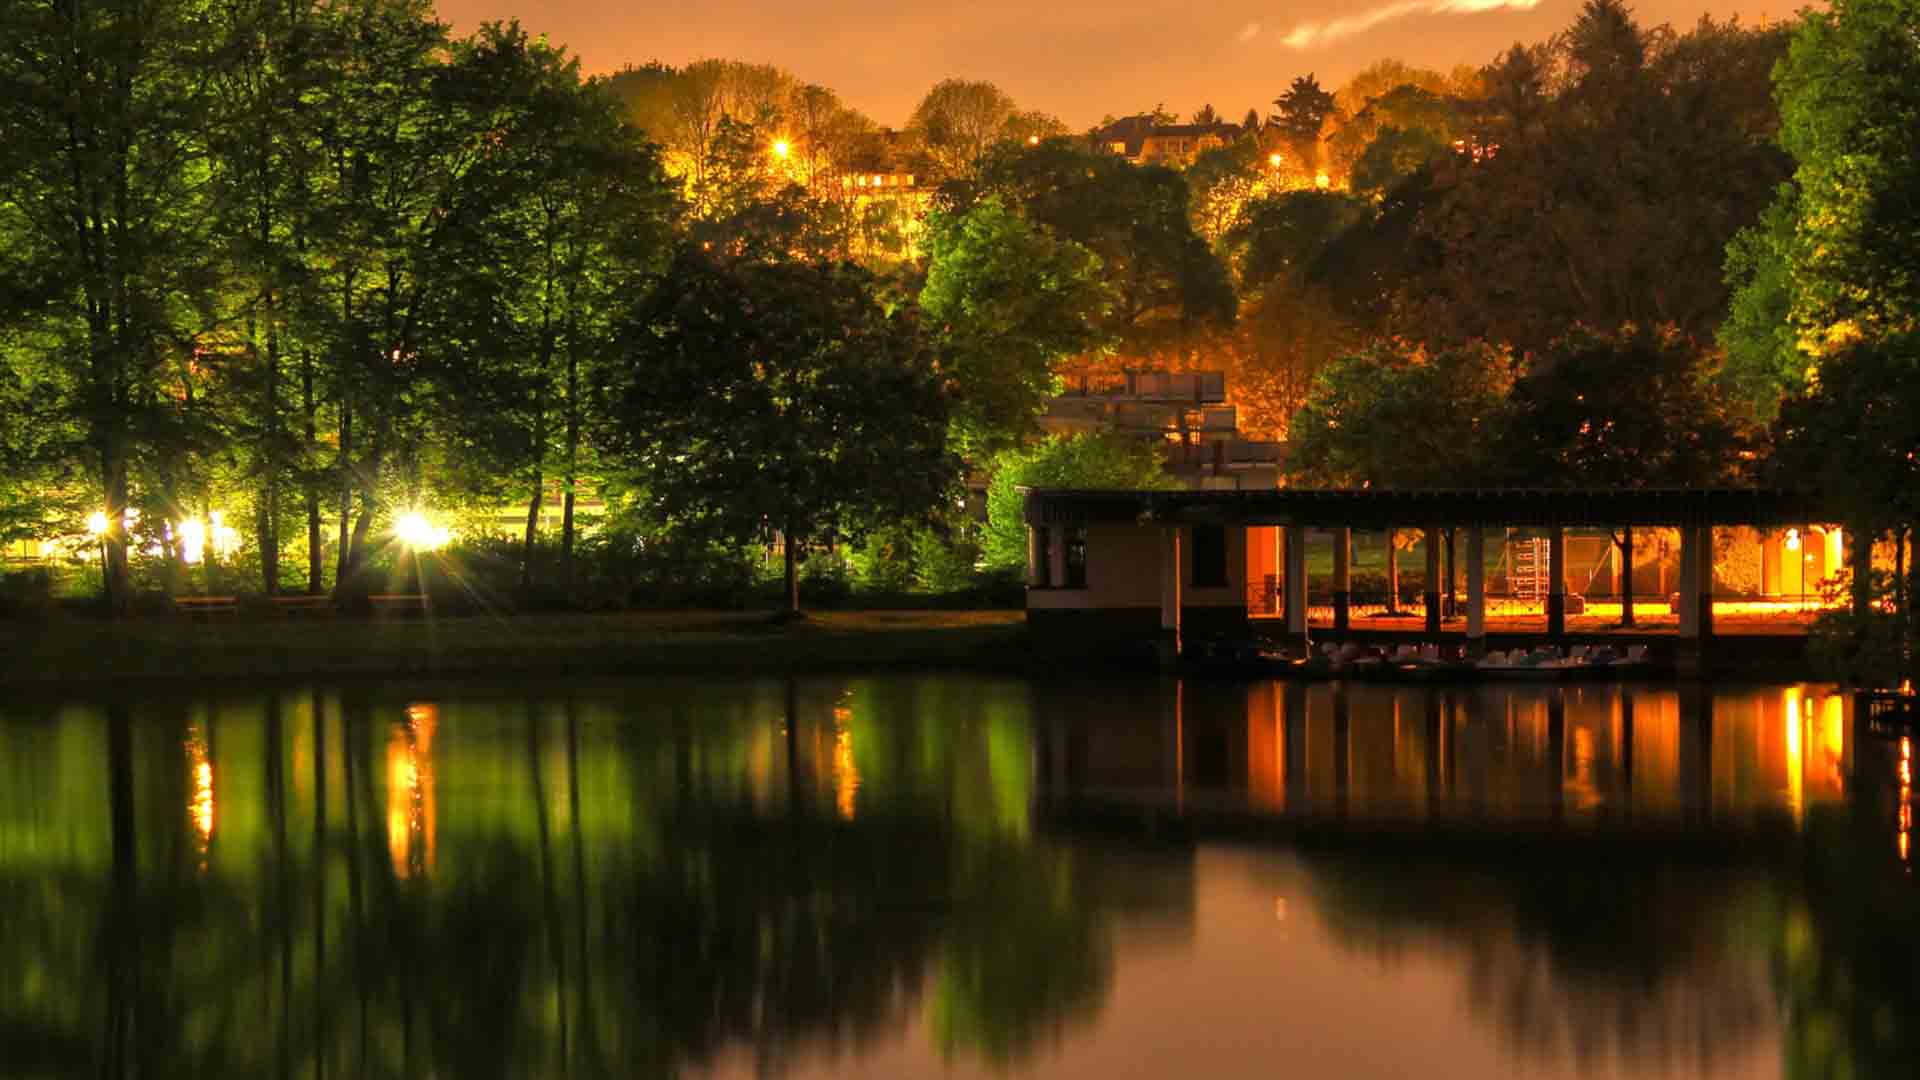 Beautiful Resort With Lights Surrounded By Trees With Reflection On Body Of Water 2K Beautiful